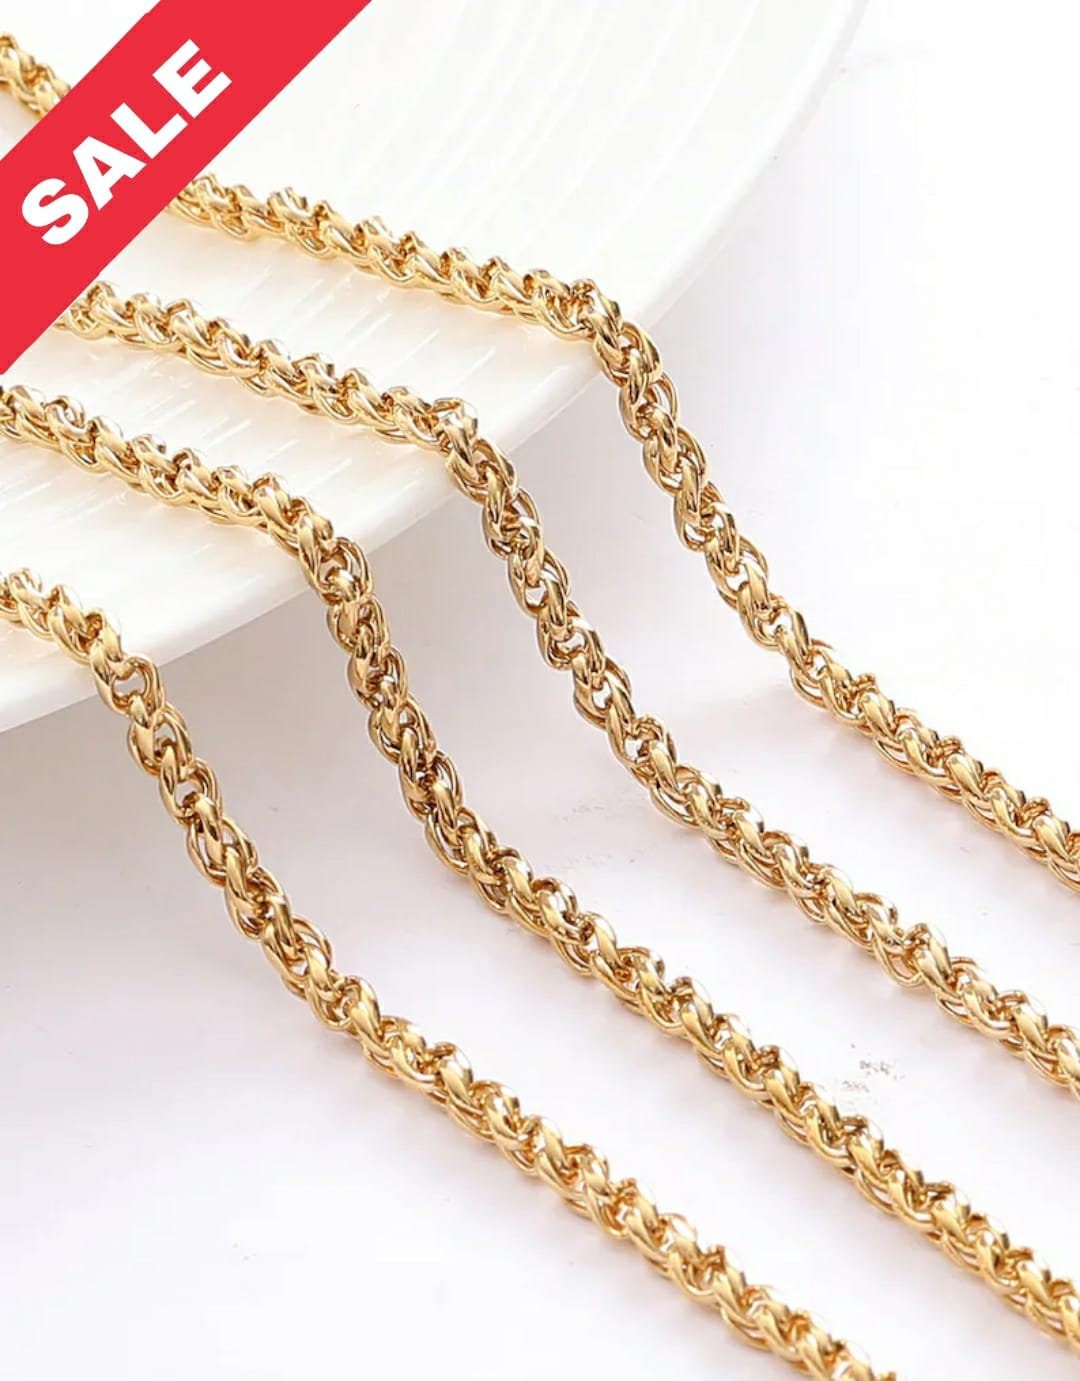 18k Gold Plated chain wheat chain thickness 4mm findings for jewelry making gfc091 sold by the foot